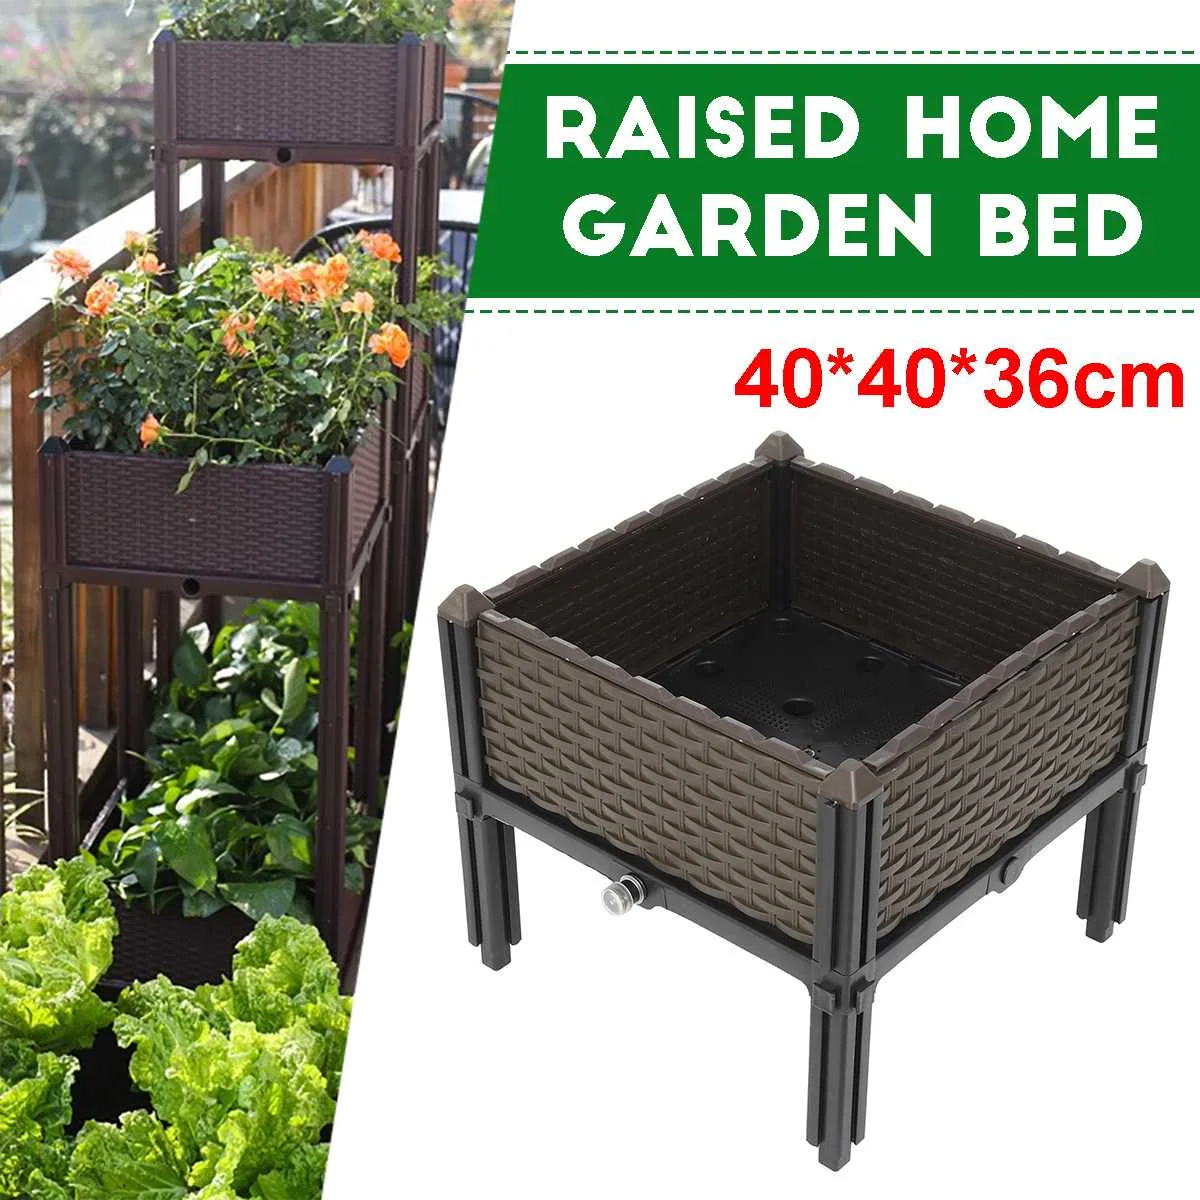 

Nursery pots Raised Garden Bed for Vegetables Elevated Planter Box with Legs Outdoor Patio Flower Herb Container Gardenin